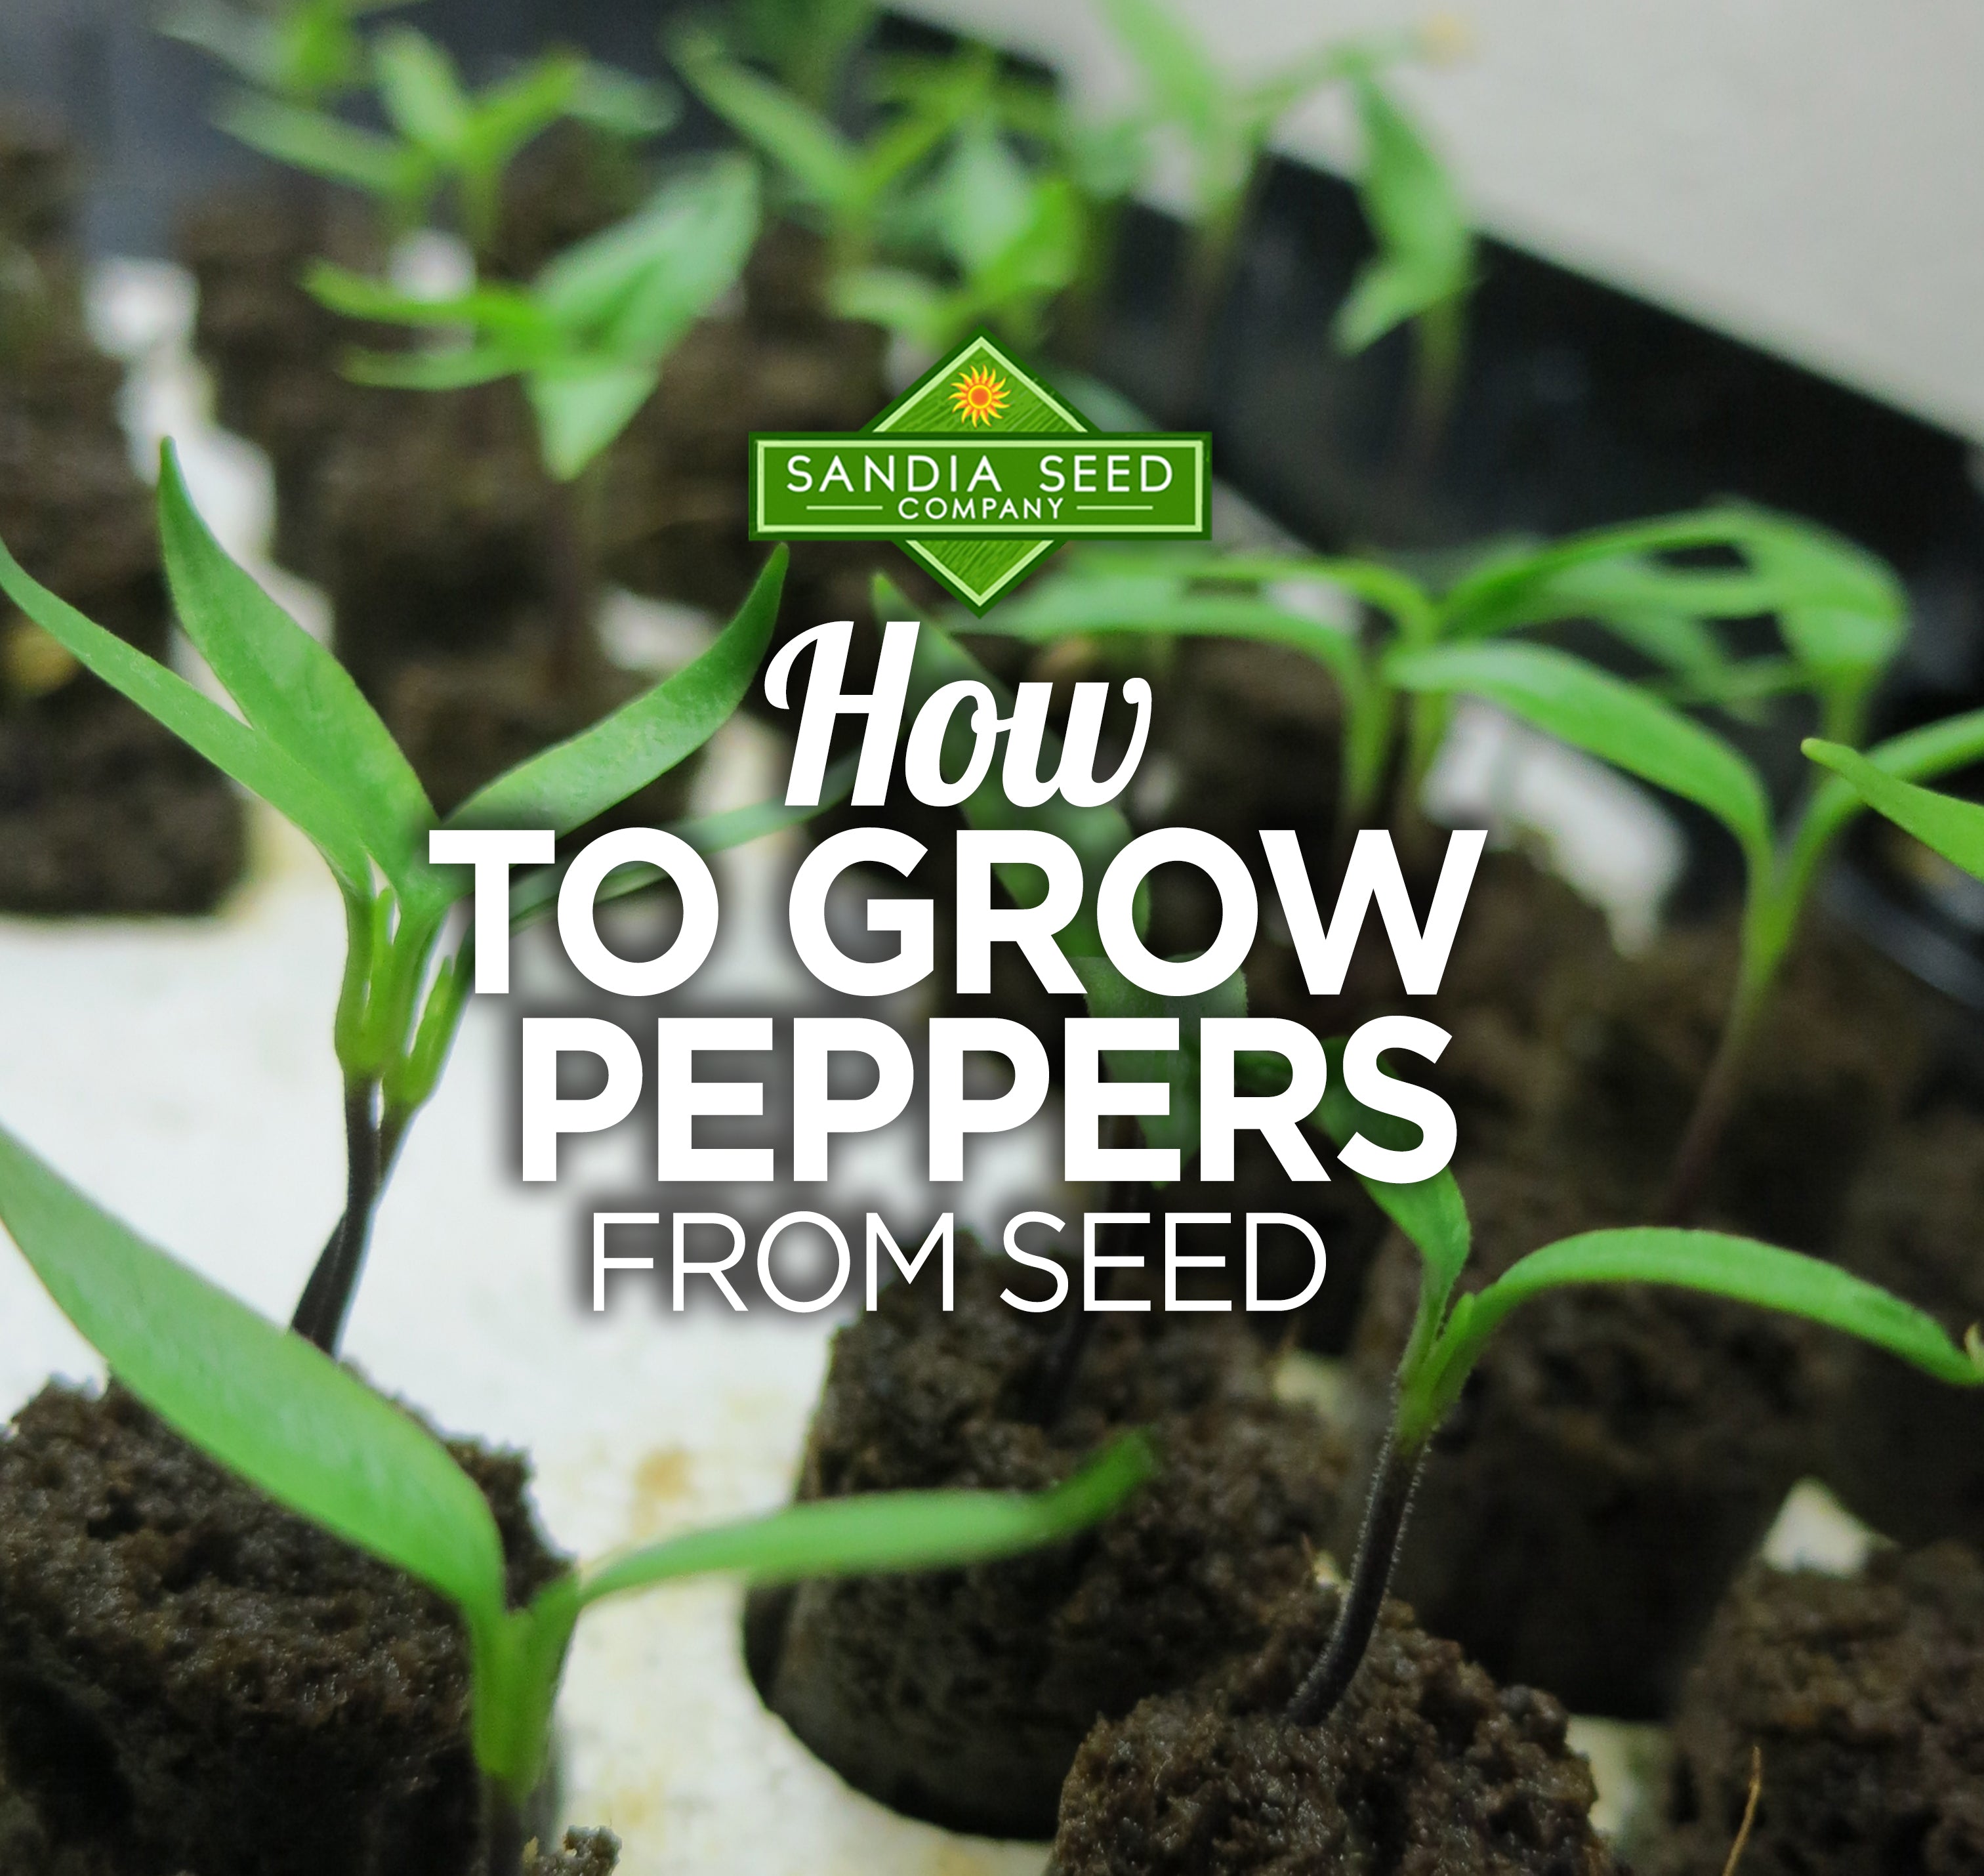 How to Grow Peppers fro Seed